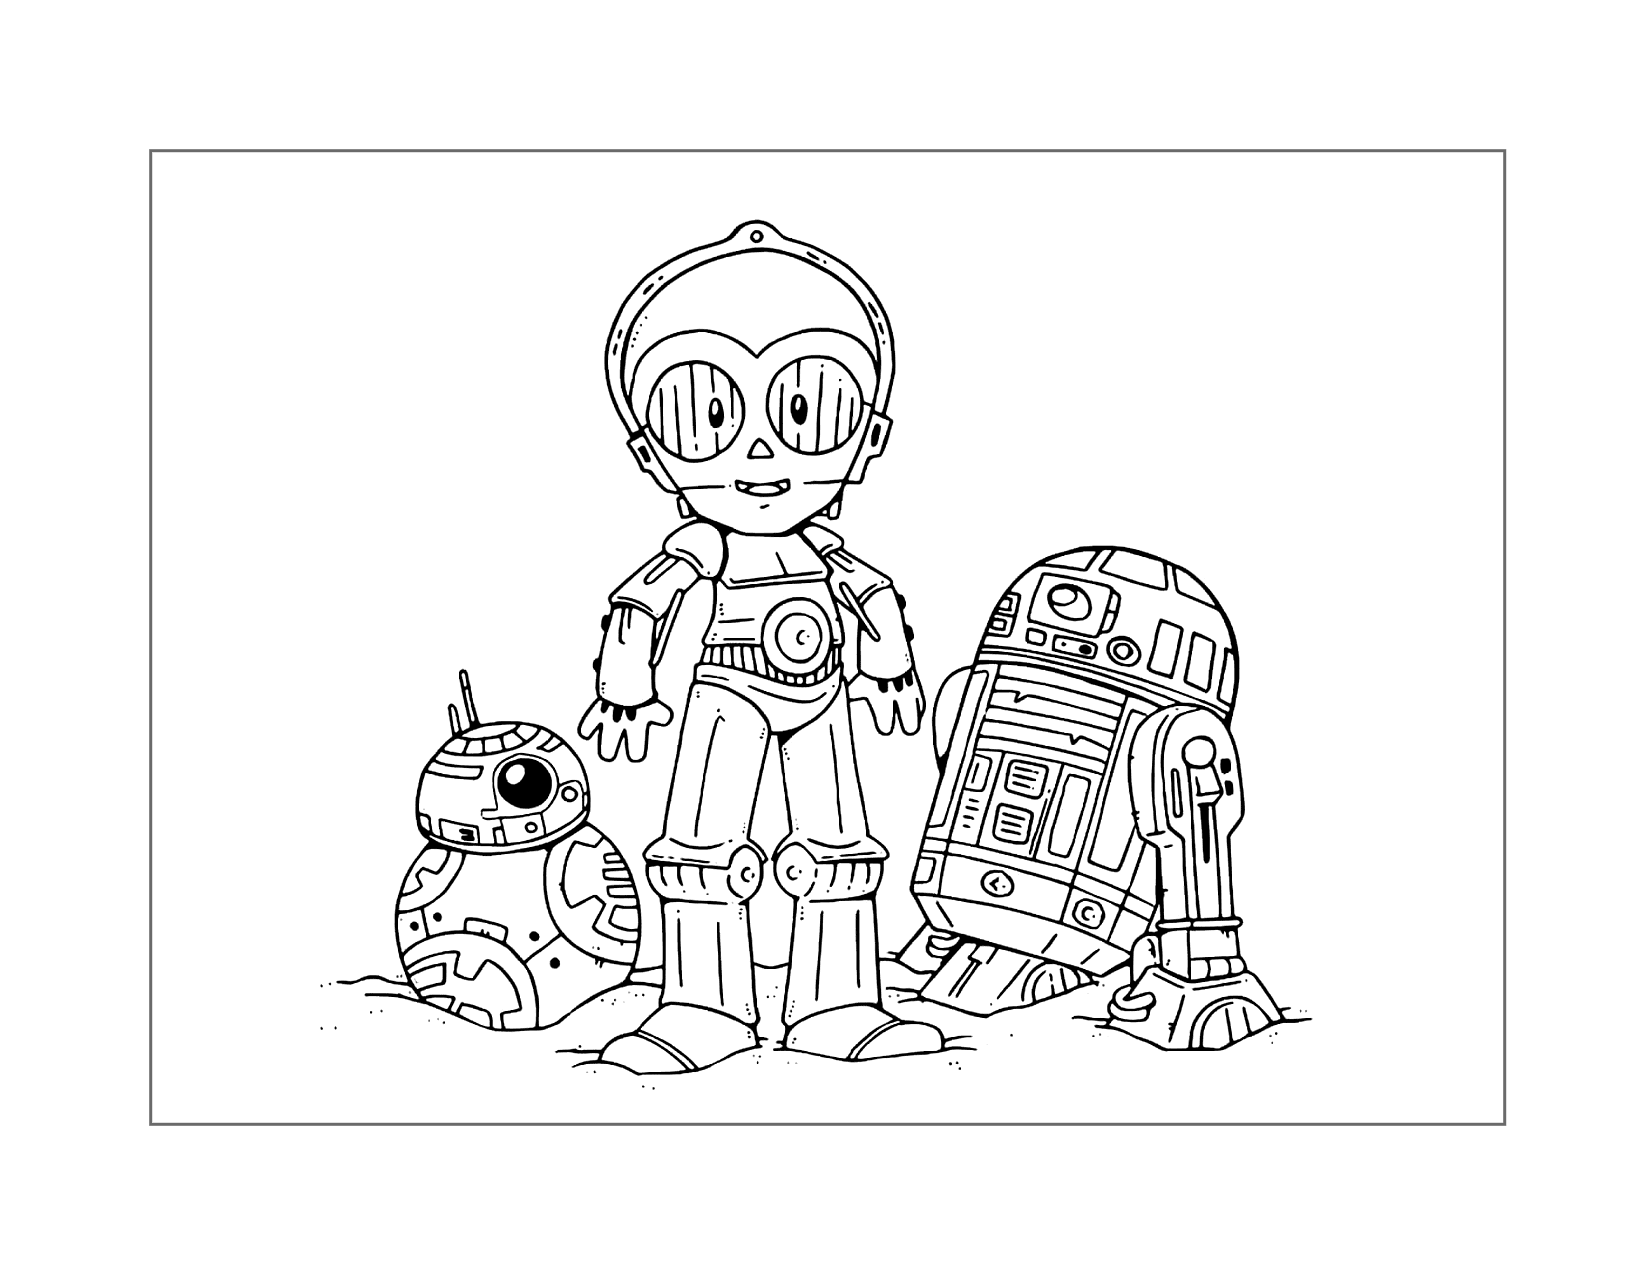 Cute Baby Robot Star Wars Coloring Page